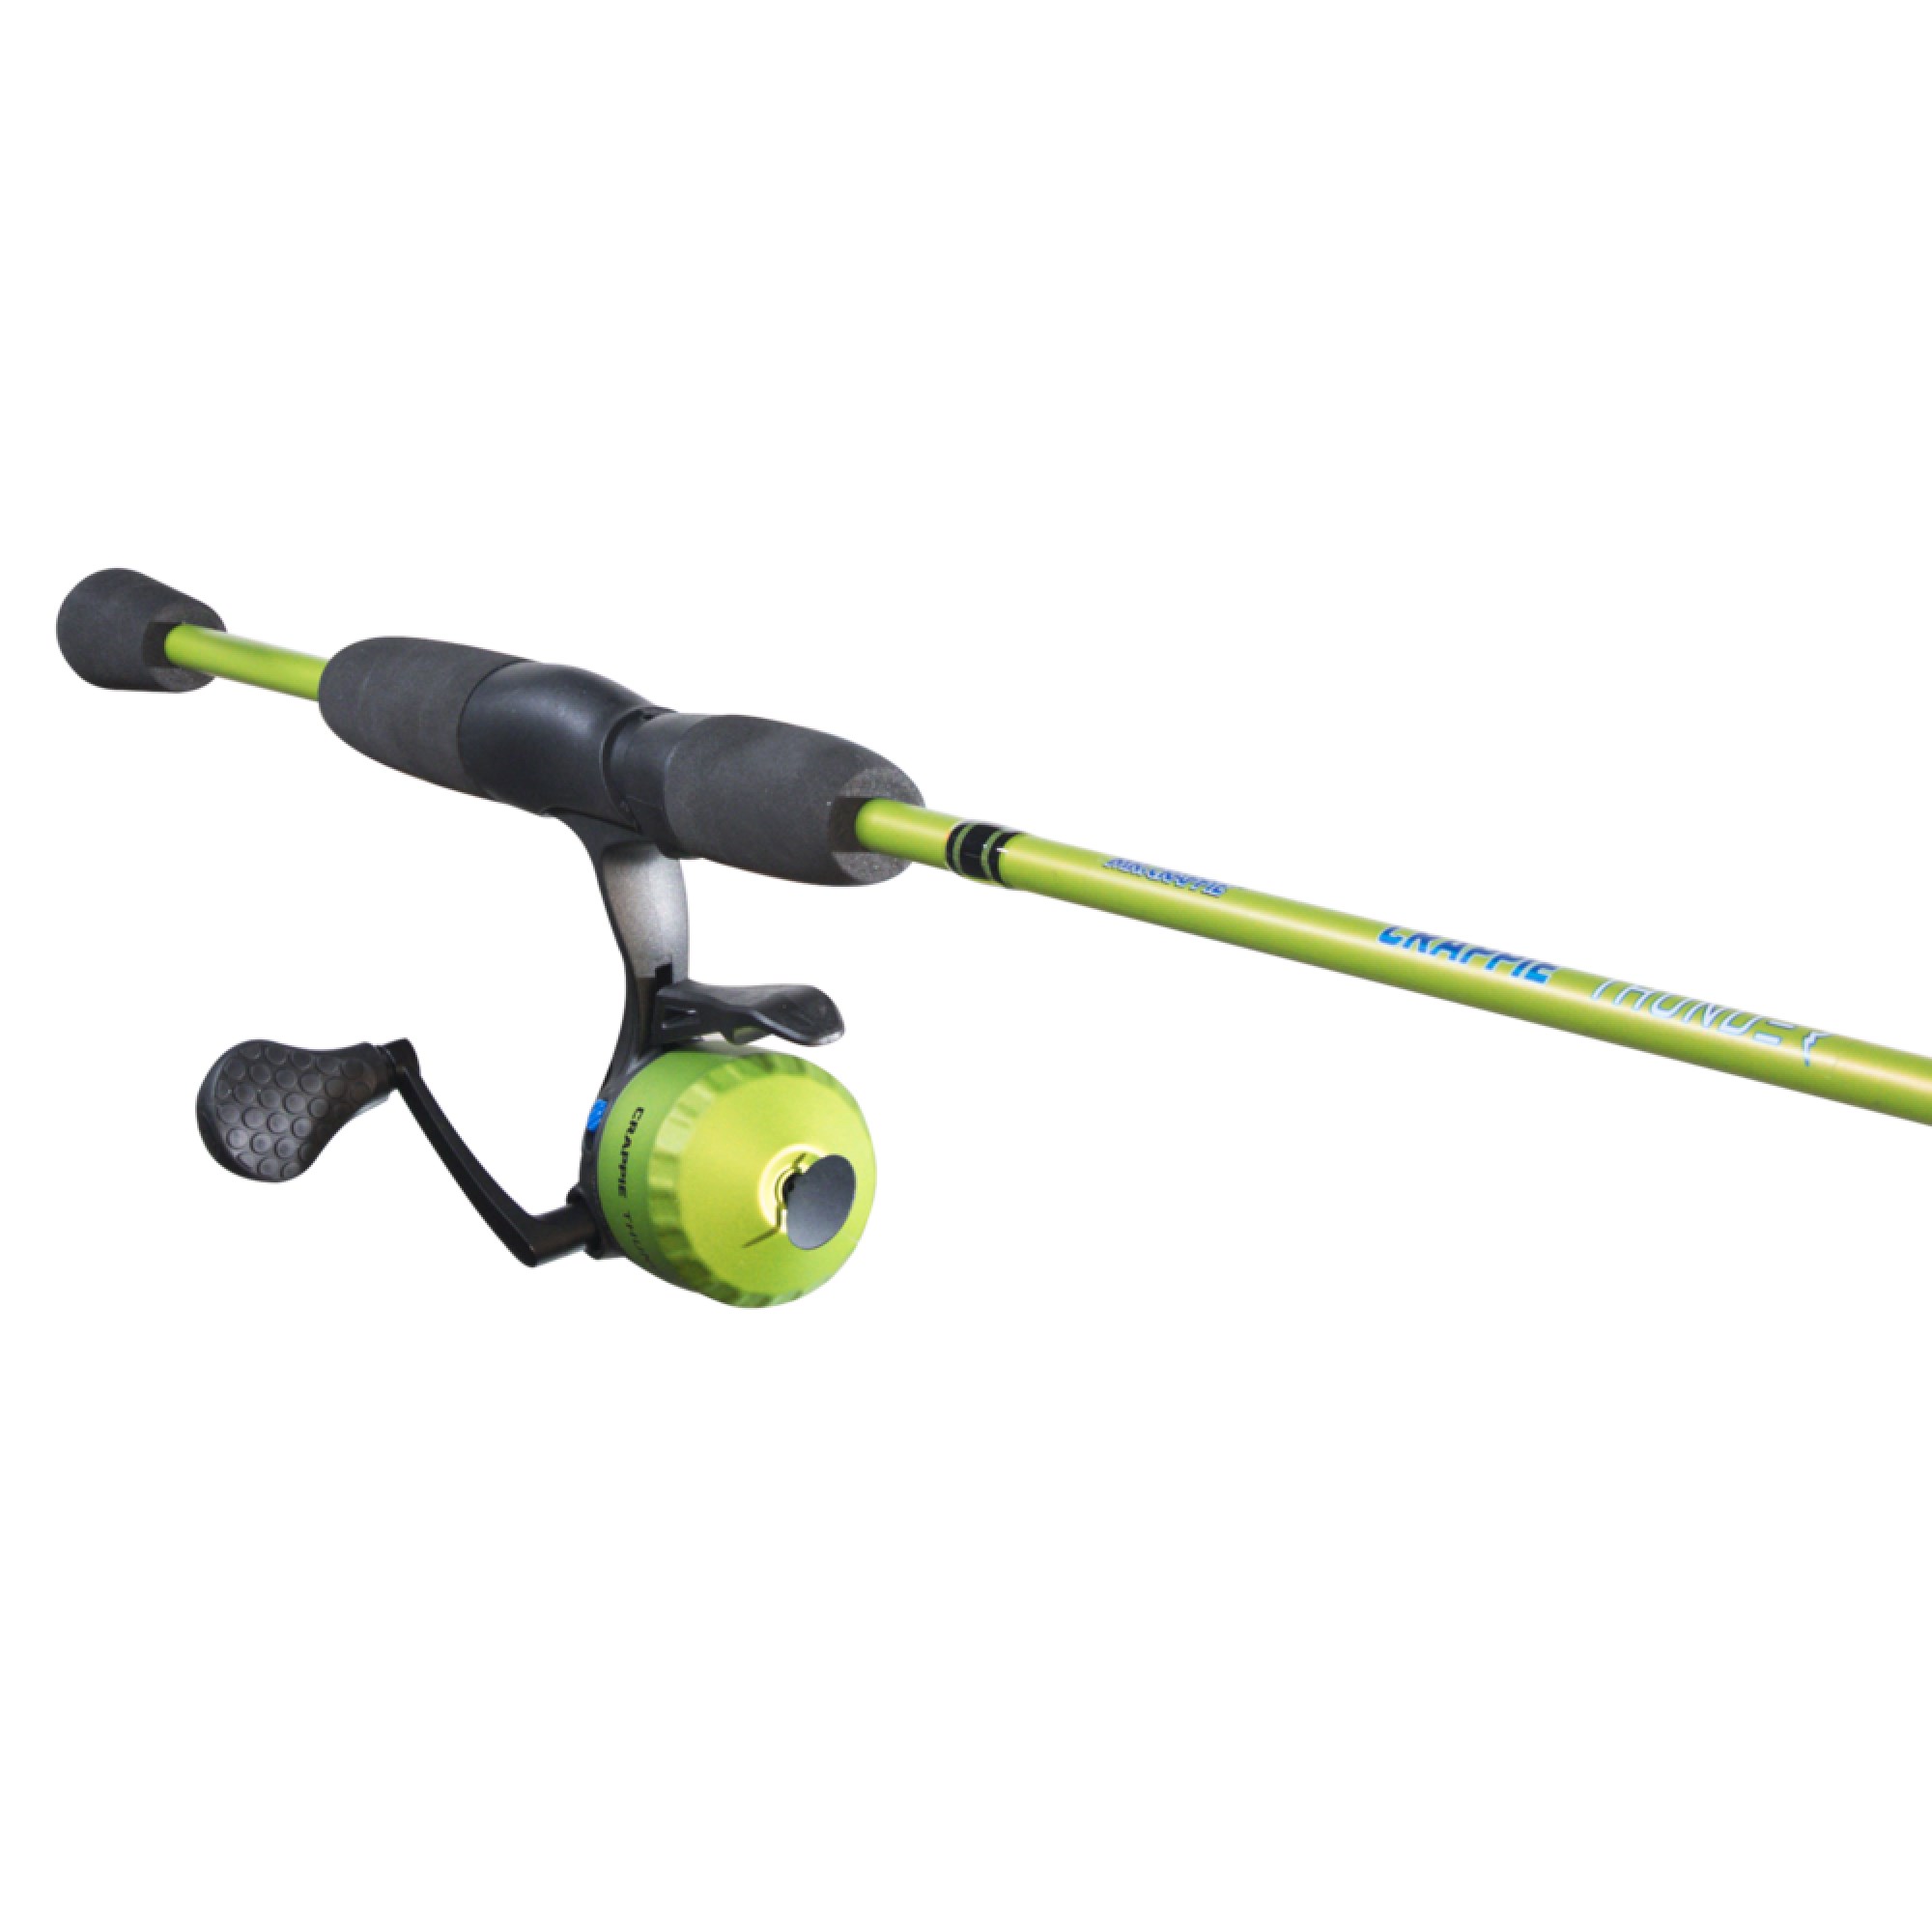 Mr. Crappie Thunder Underspin Rod and Reel Combo , Up to $2.00 Off